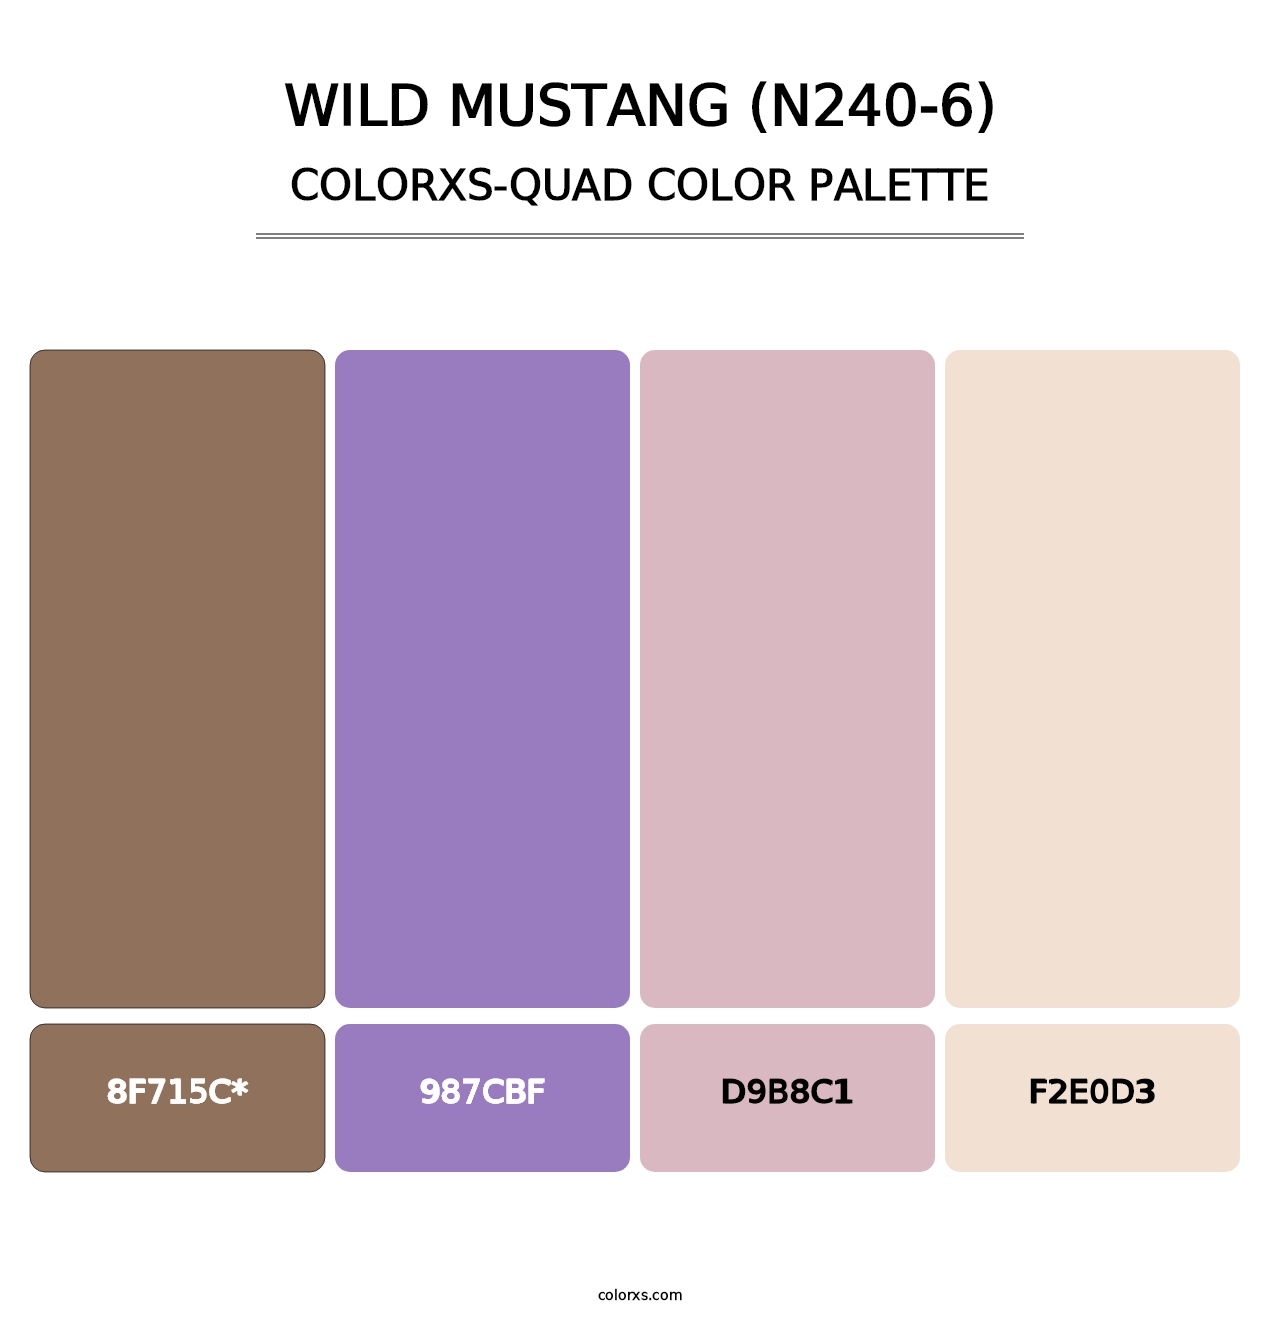 Wild Mustang (N240-6) - Colorxs Quad Palette